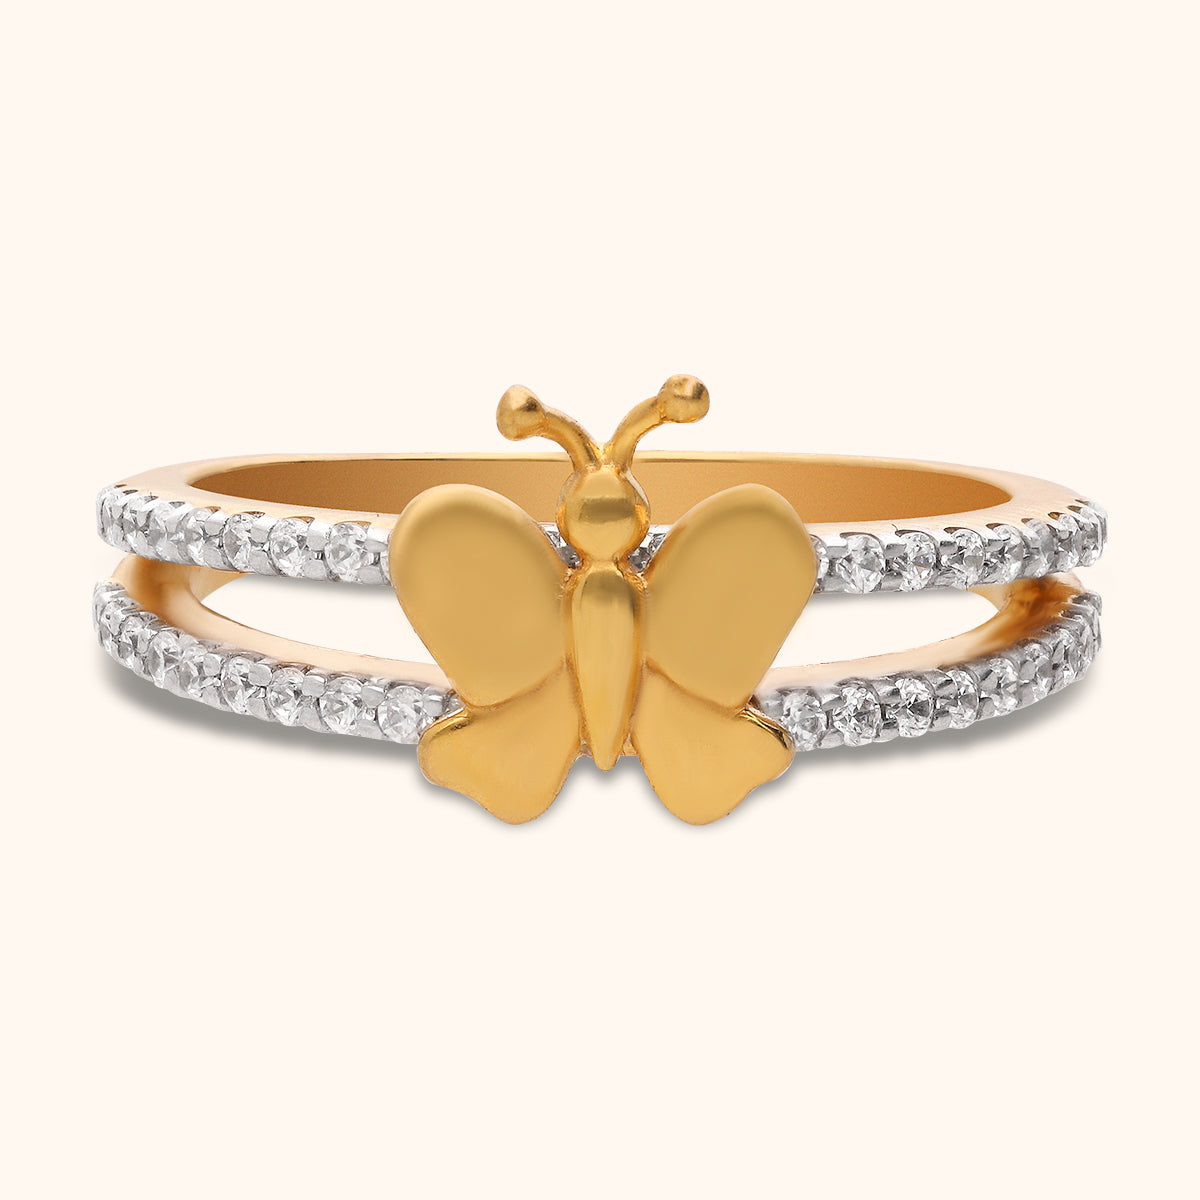 SPE Gold -Pattern Design Gents Gold Ring-01-06 - Poonamallee